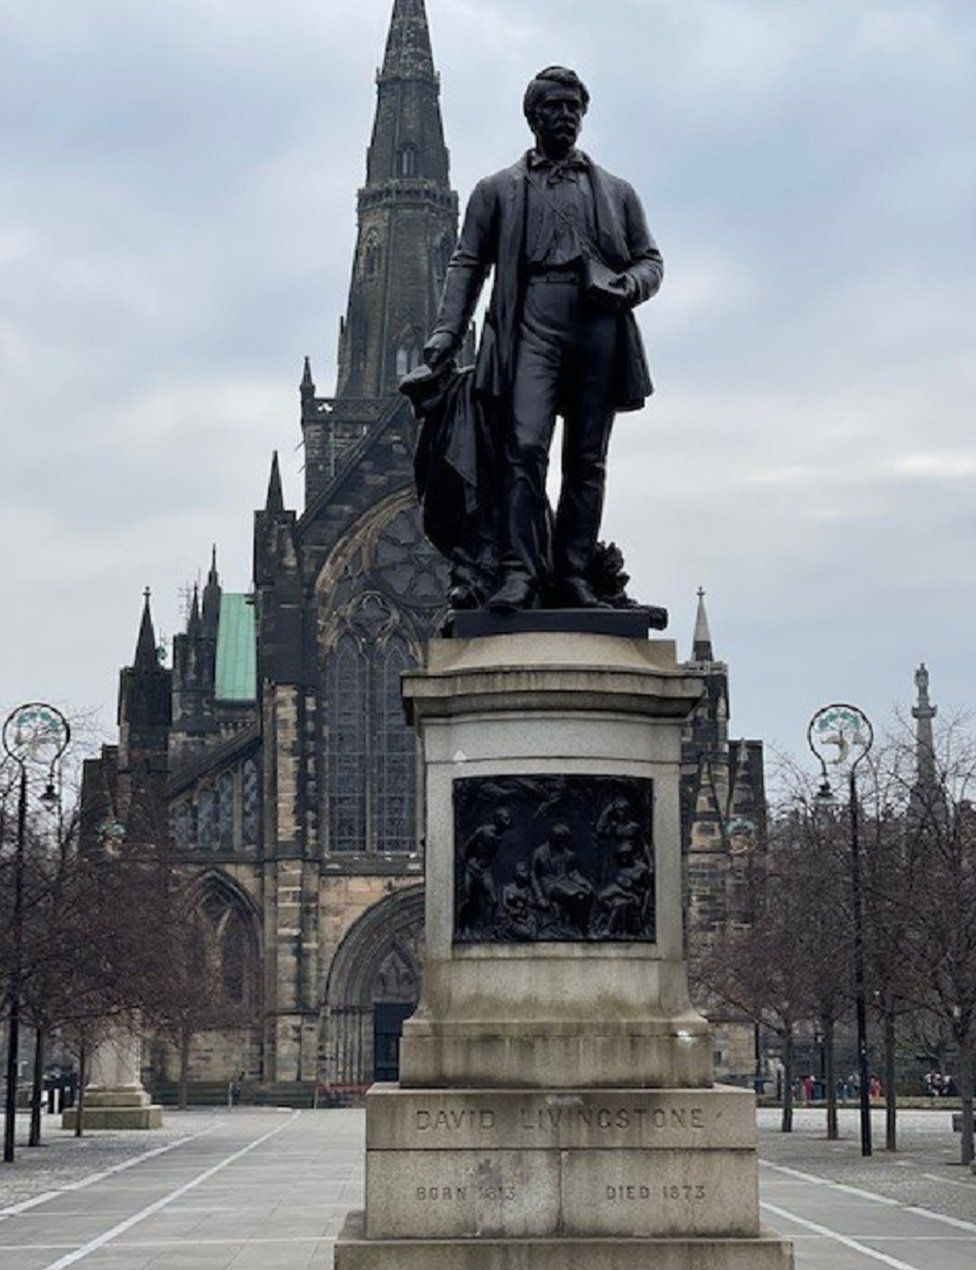 Glasgow's statues have connections to the Atlantic slave trade - BBC News